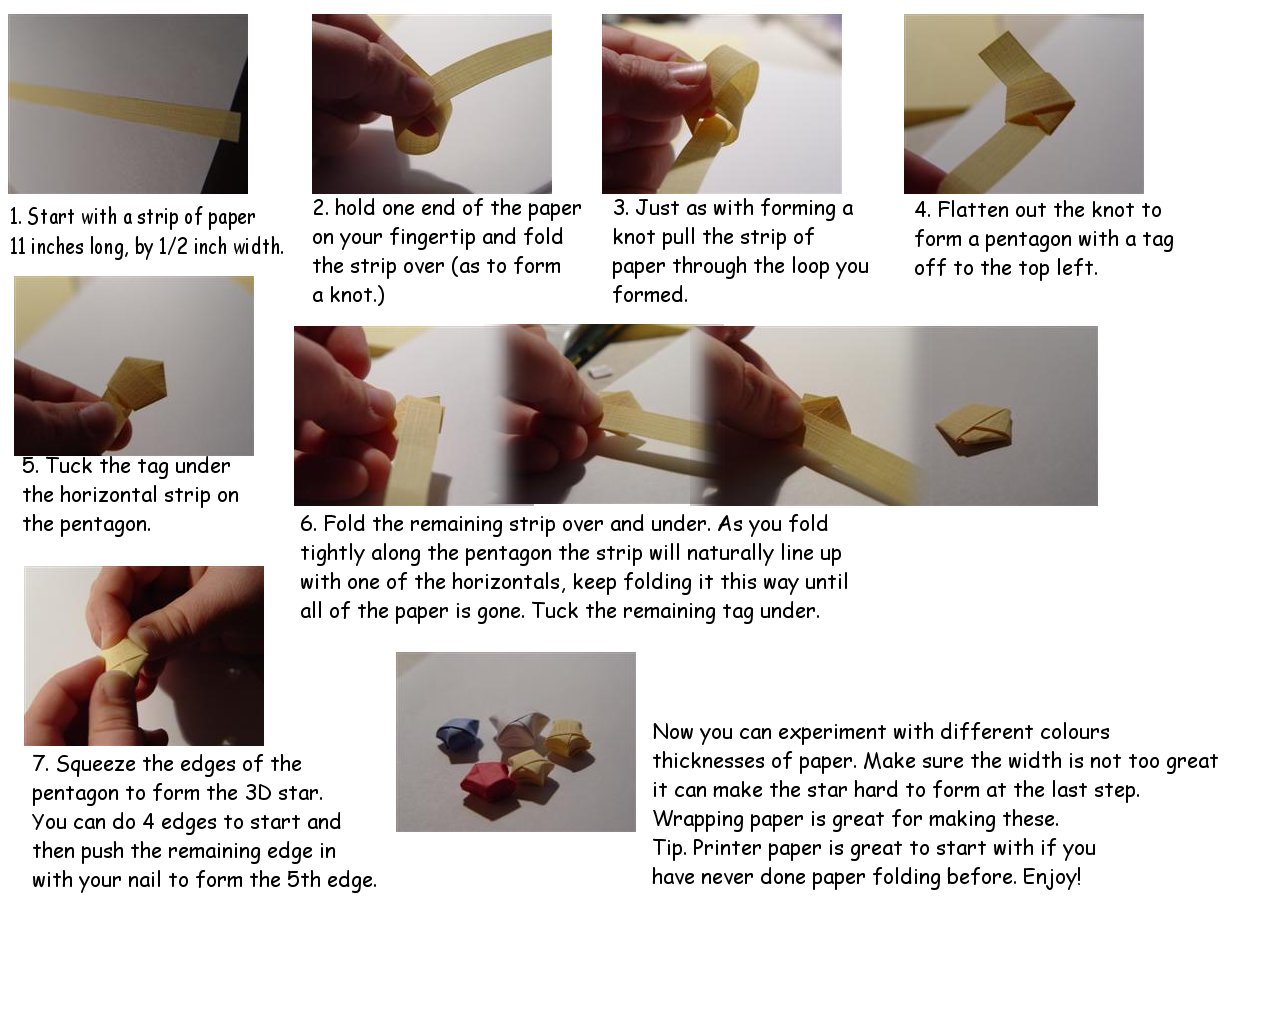 Paper Origami Stars TUTORIAL by carriephlyons on DeviantArt